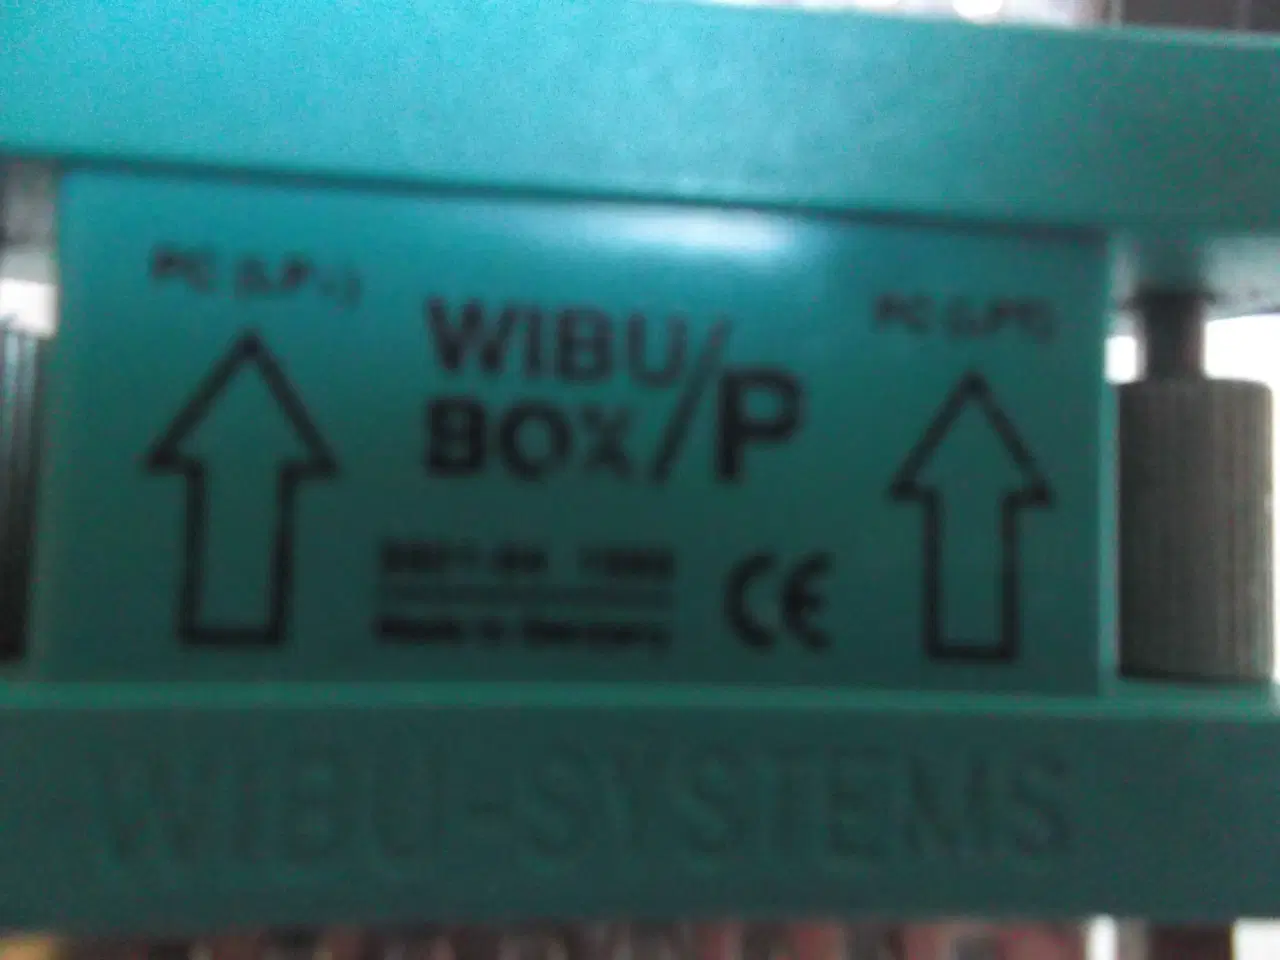 Billede 2 - Wibu-Box/P is the WibuKey protection hardware